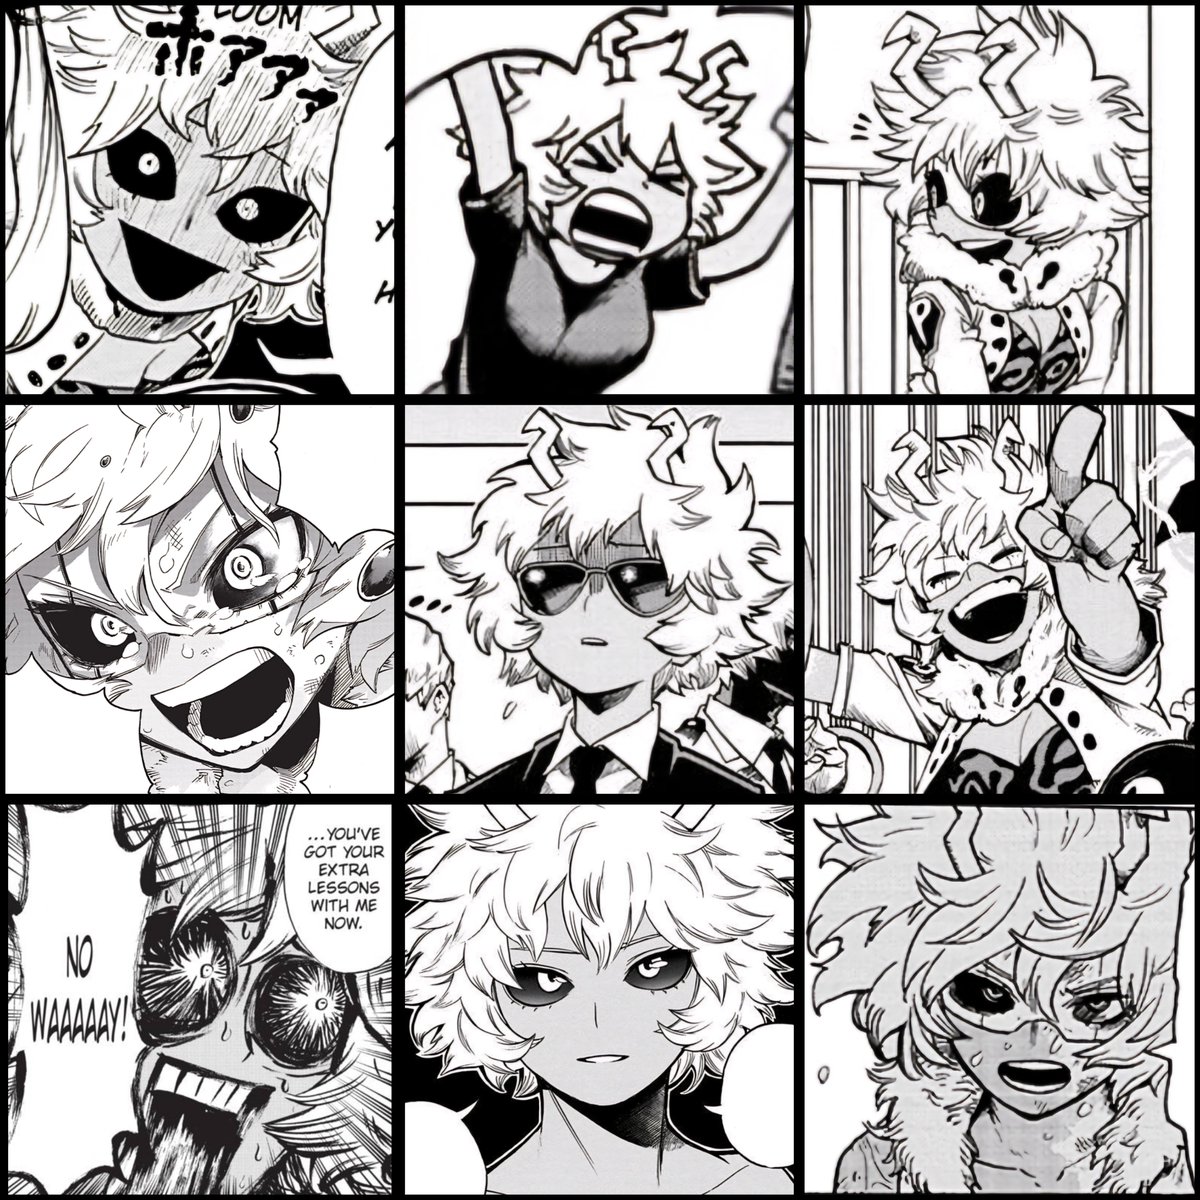 Mina remains the absolute Queen of facial expressions & emotional diversity, even as of #MHA421!

I have no doubt Horikoshi has a blast drawing her!